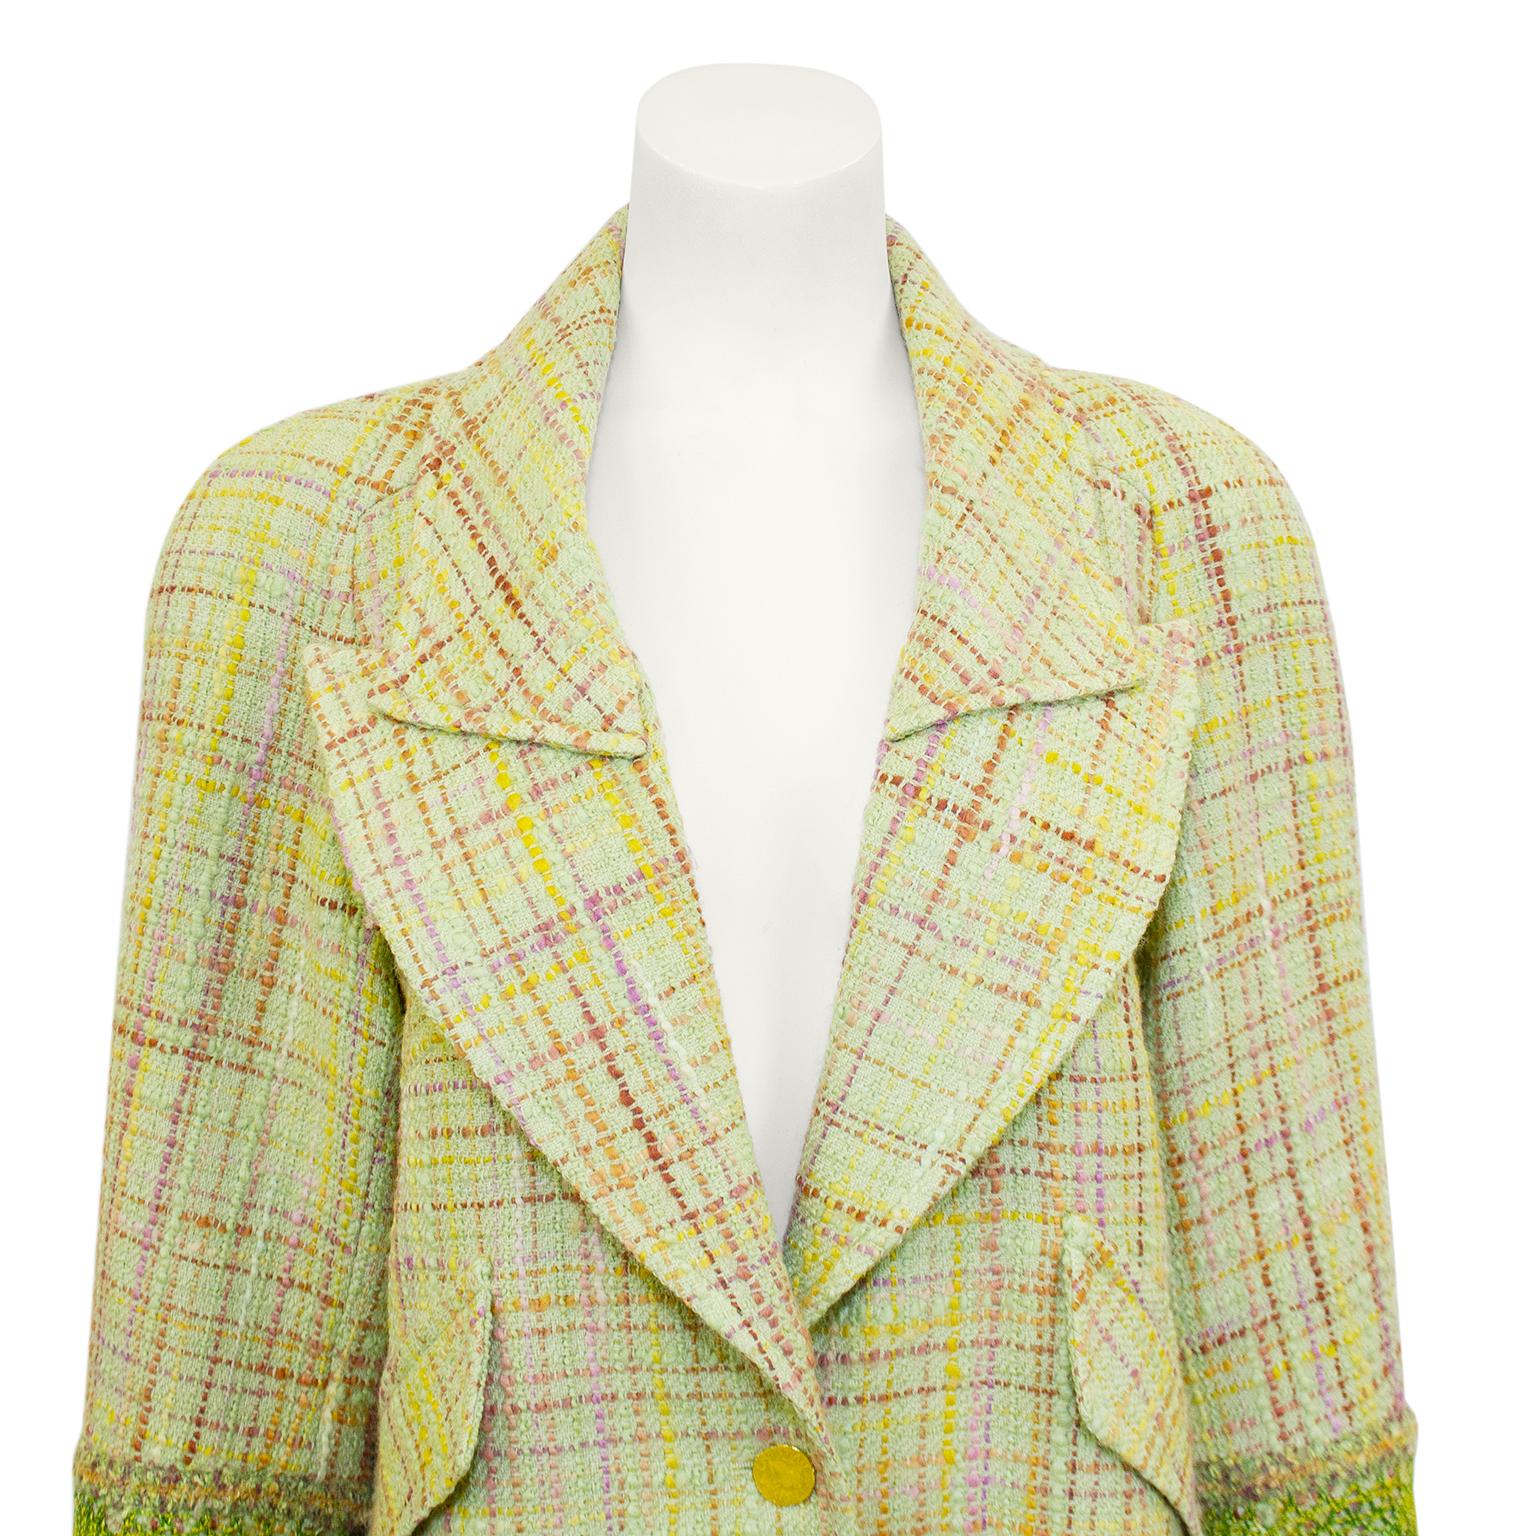 1990s Christian Lacroix Pastel Green Long Tweed Jacket and Skirt Ensemble In Good Condition For Sale In Toronto, Ontario